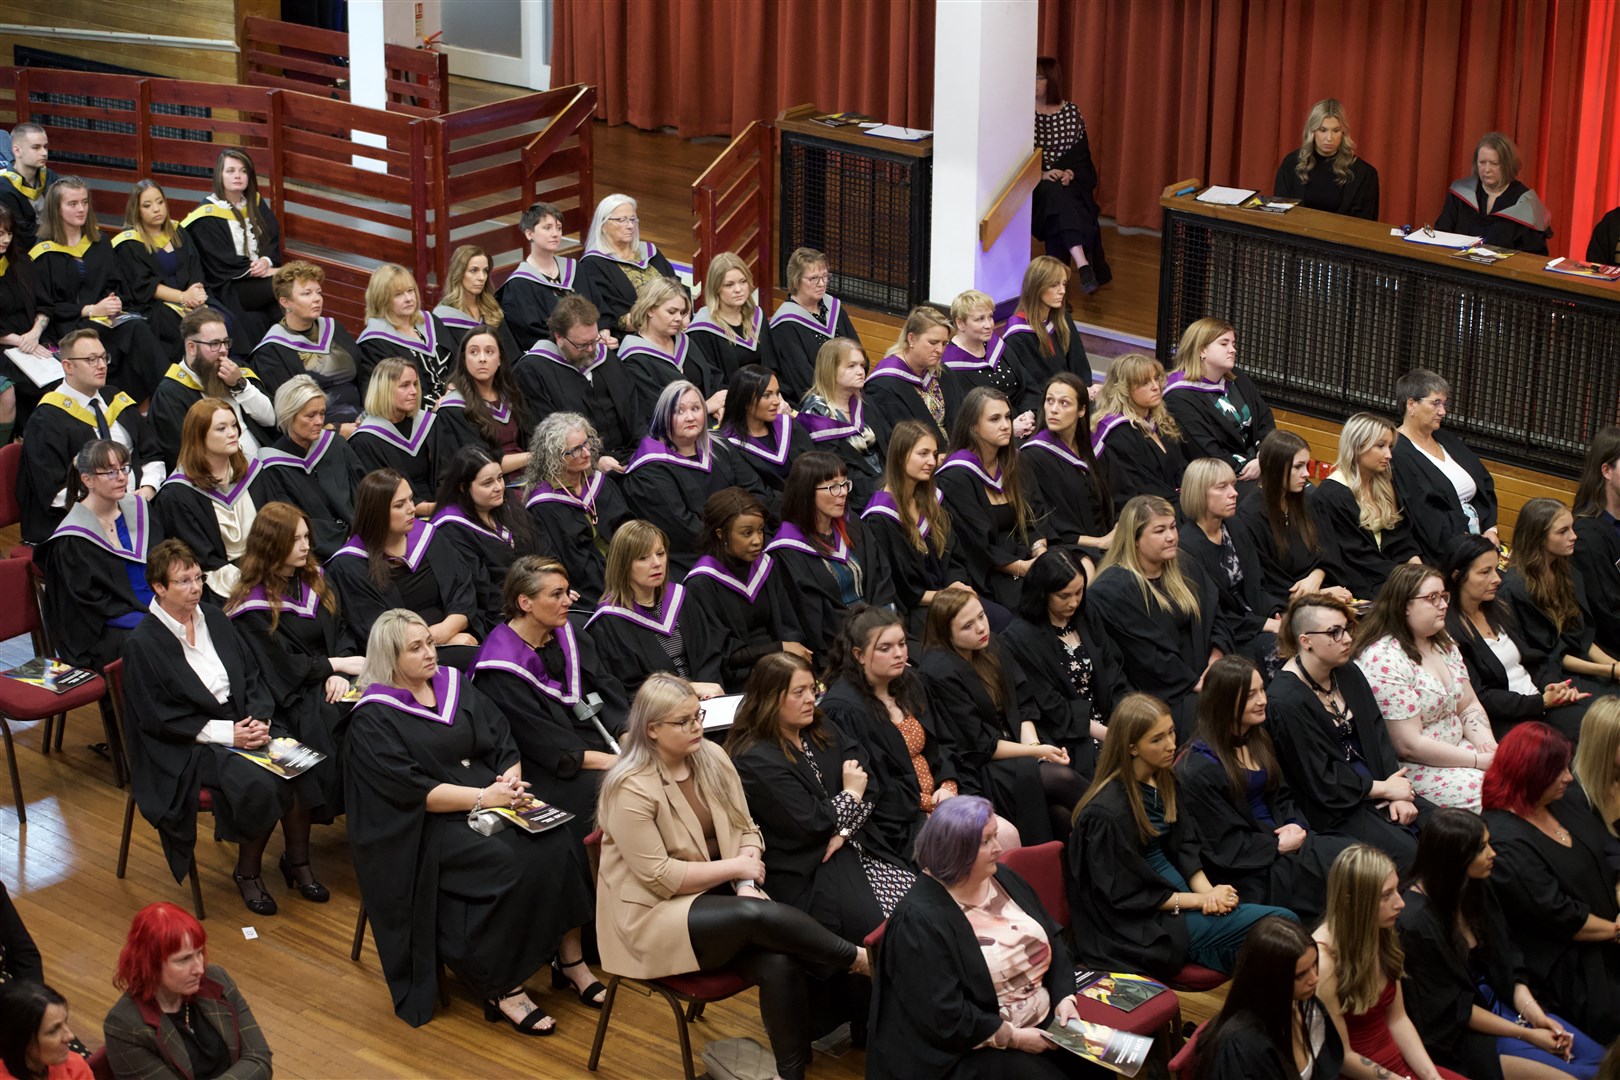 The class of UHI Moray in 2023 watch on at the graduation ceremony. Picture: Beth Taylor